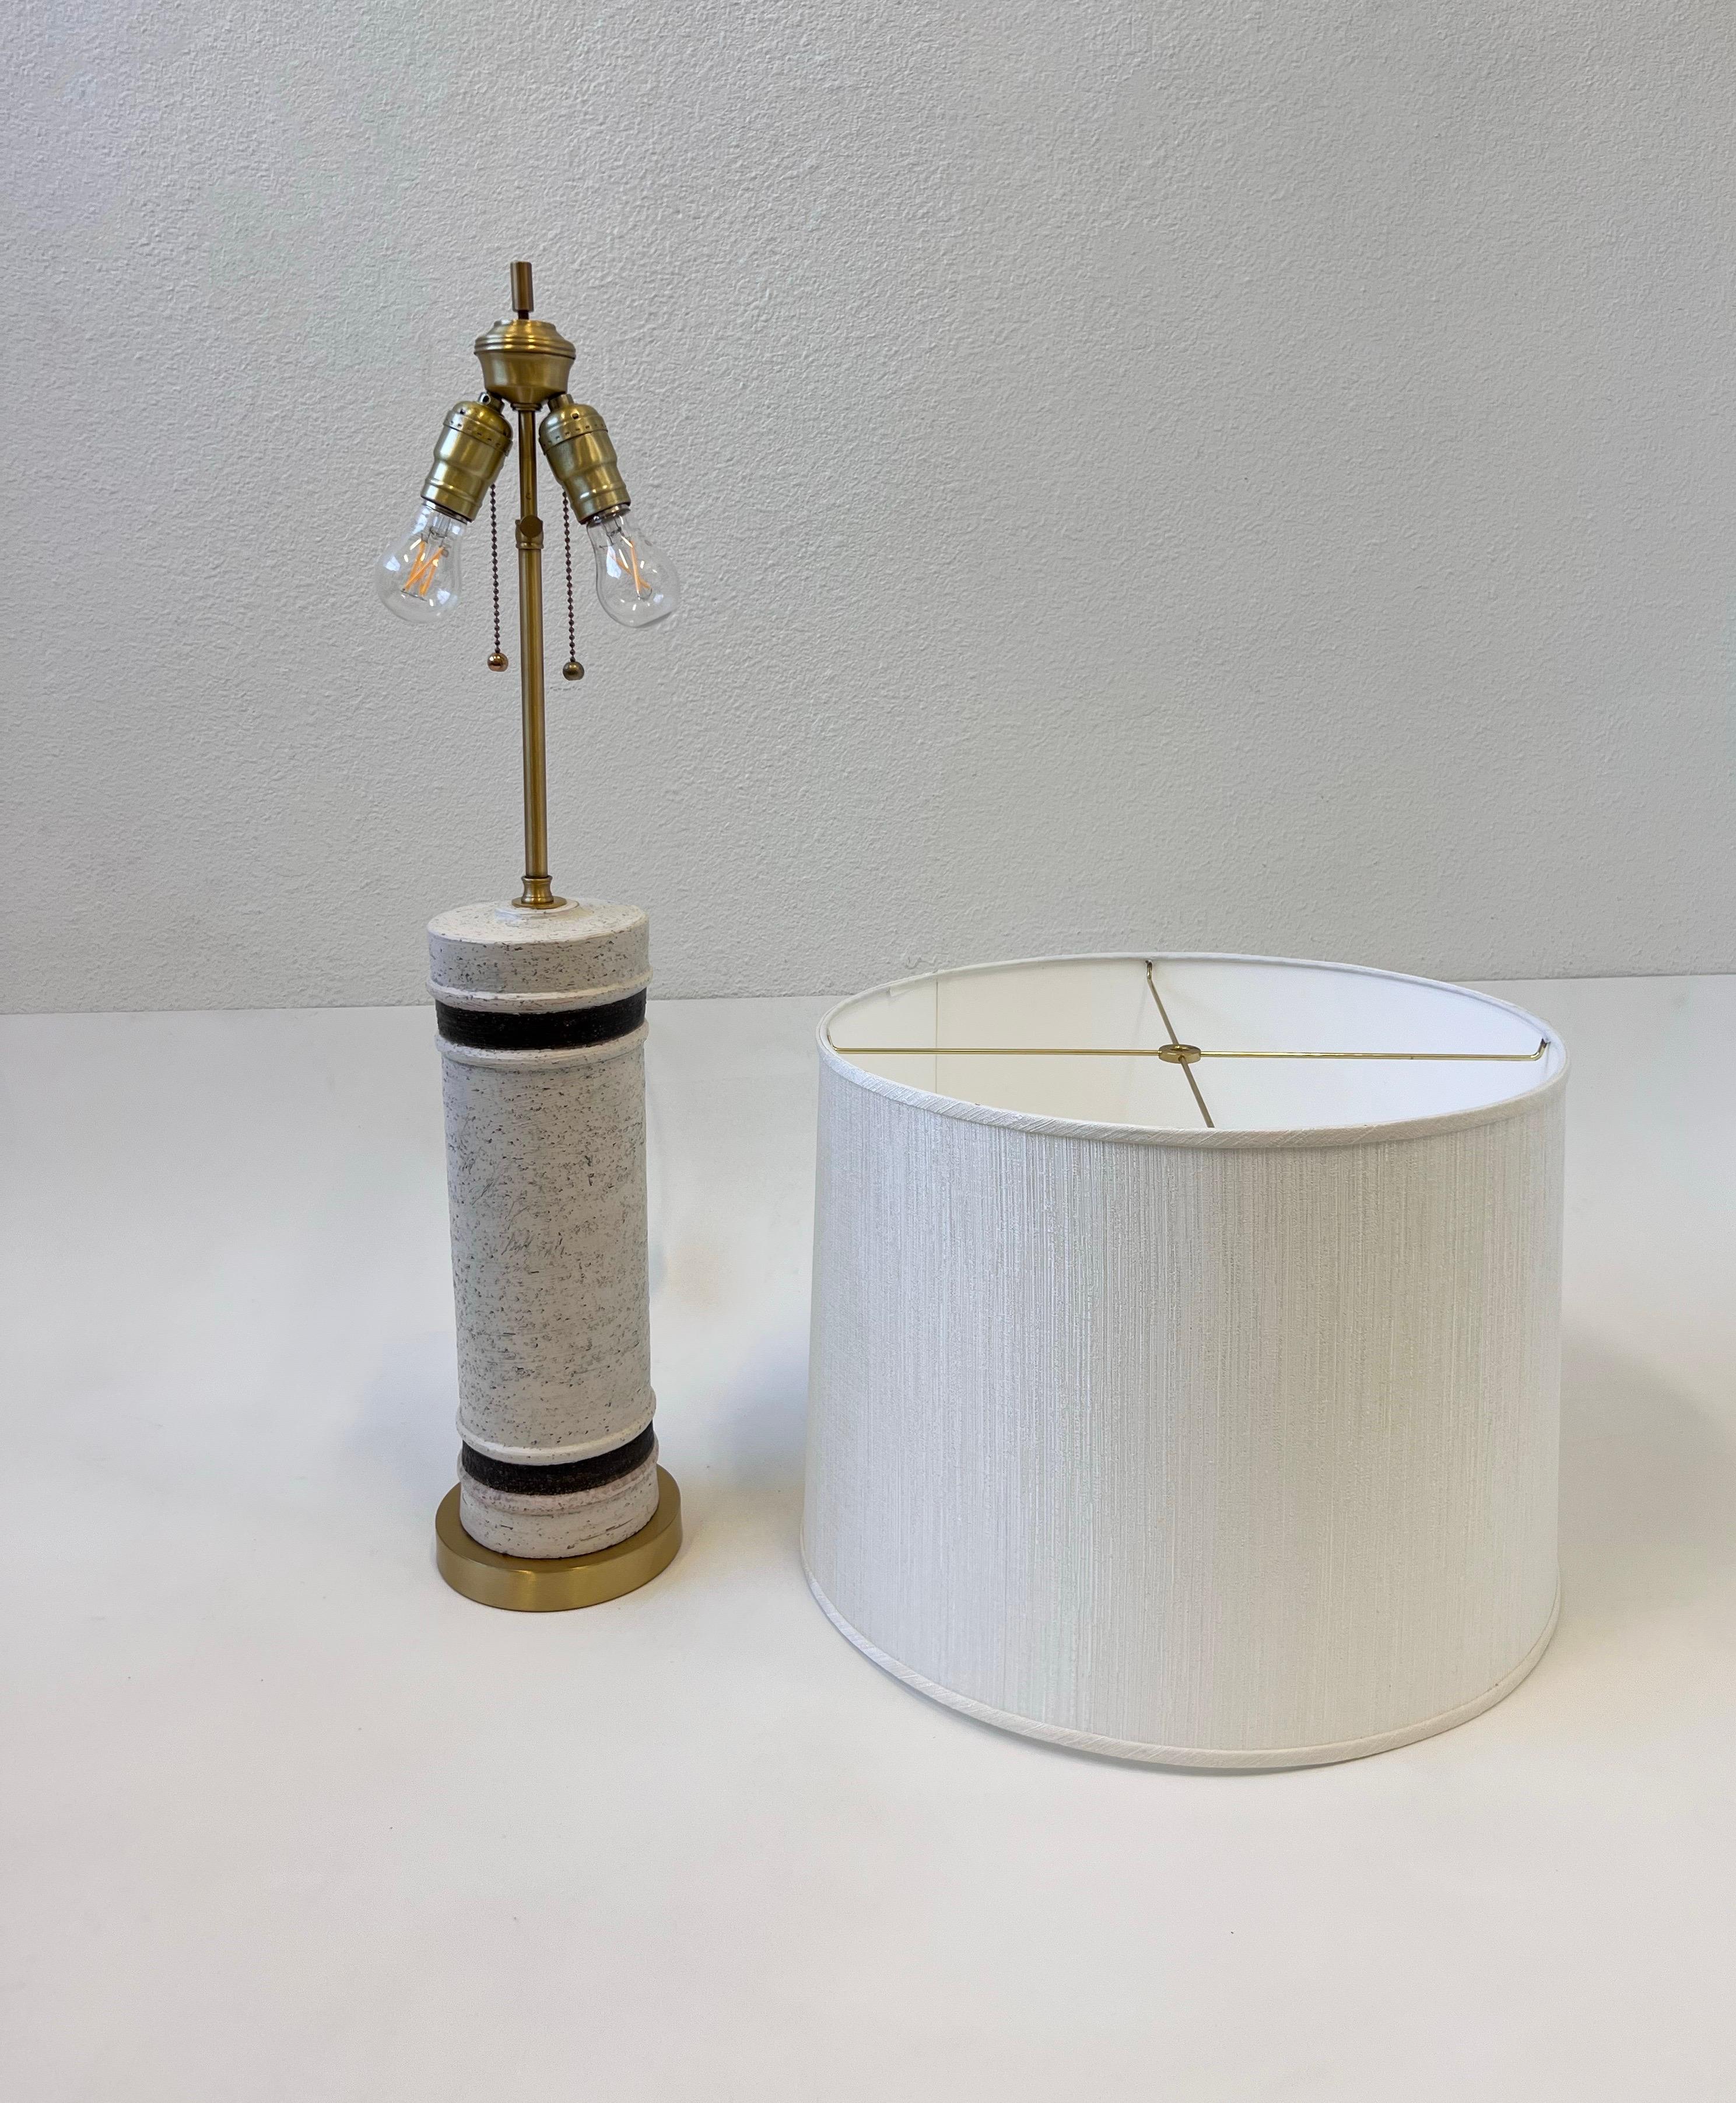 1960’s Italian ceramic and brass table lamp by Bitossi for Bergboms Sweden. 
Newly rewired with satin brass hardware and new white silk shade. 
Constructed of ceramic with white and brown glazed. It takes two 75w Max Edison lightbulbs. 

Base is